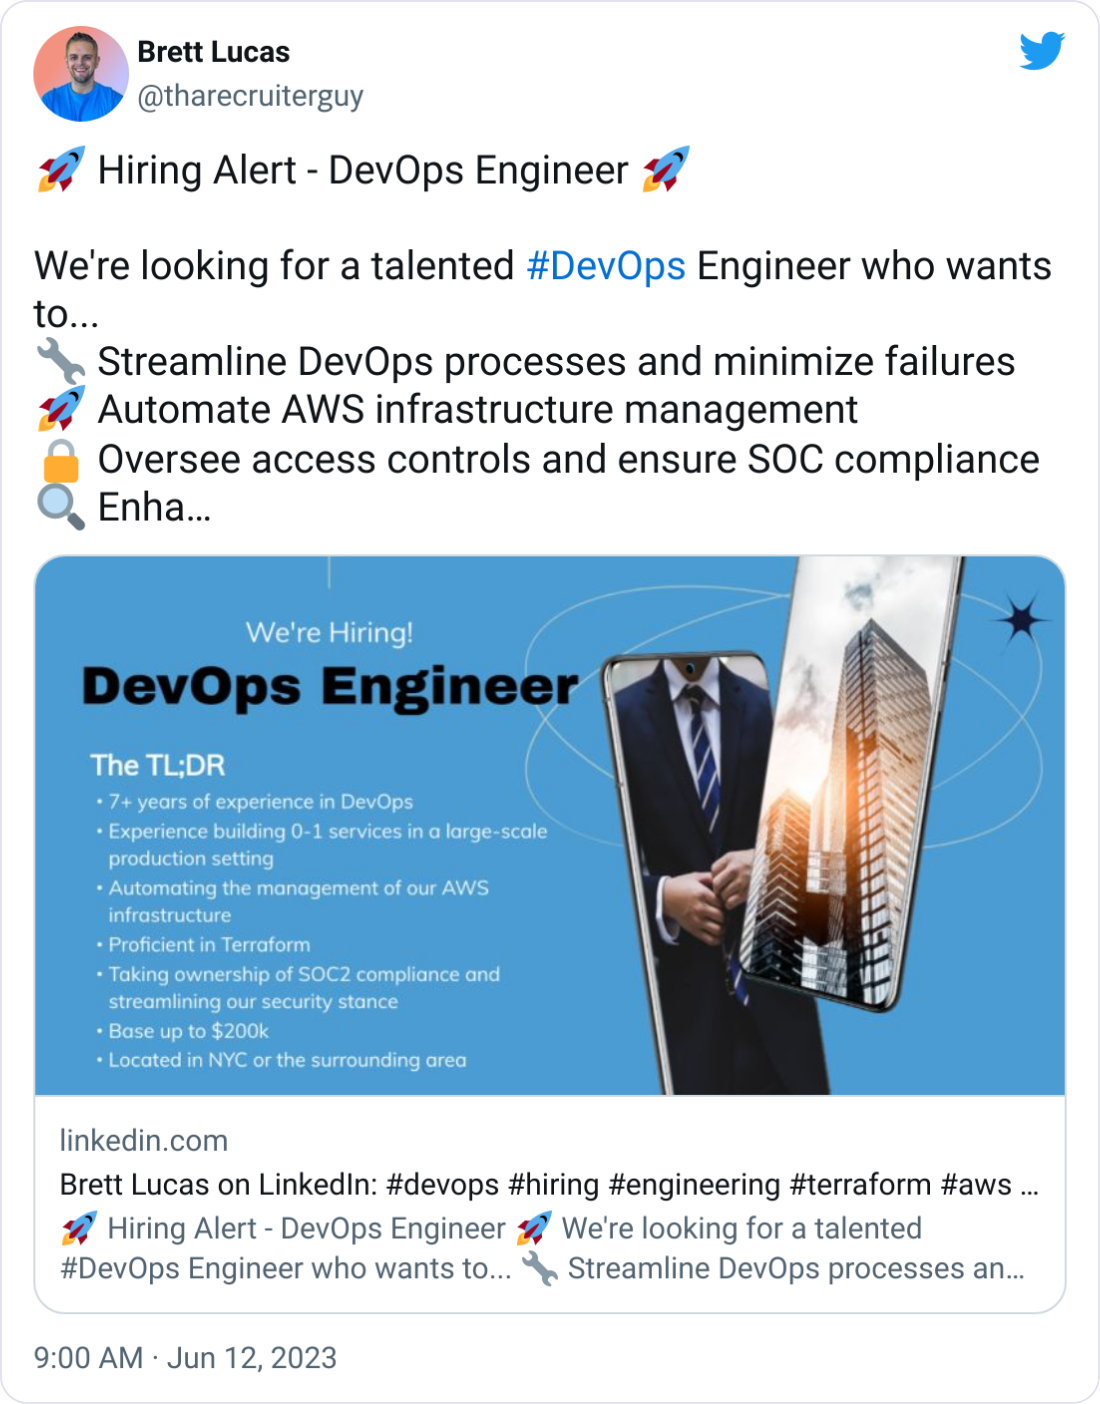 Brett Lucas @tharecruiterguy 🚀 Hiring Alert - DevOps Engineer 🚀  We're looking for a talented #DevOps Engineer who wants to... 🔧 Streamline DevOps processes and minimize failures 🚀 Automate AWS infrastructure management 🔒 Oversee access controls and ensure SOC compliance